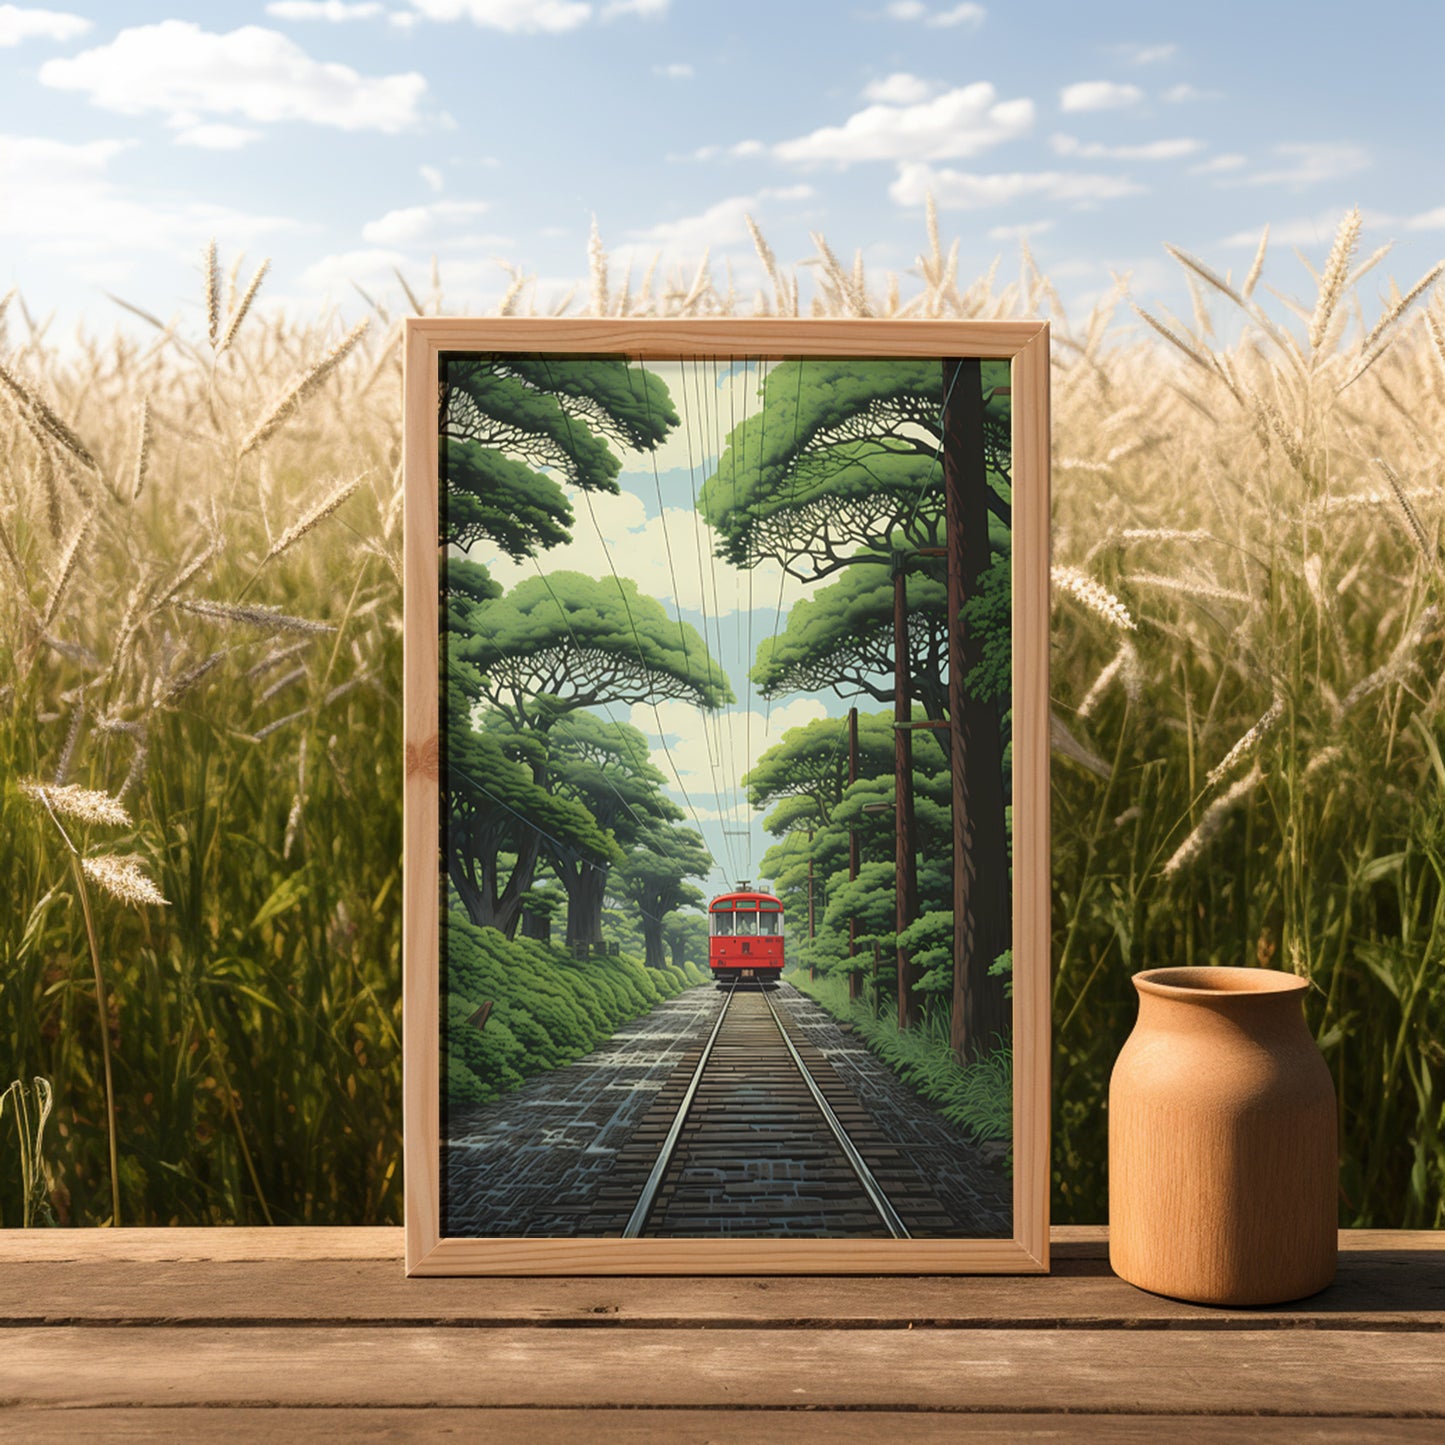 A framed picture of a train on tracks in a forest, placed on a wooden surface beside a clay pot, with tall grass in the background.